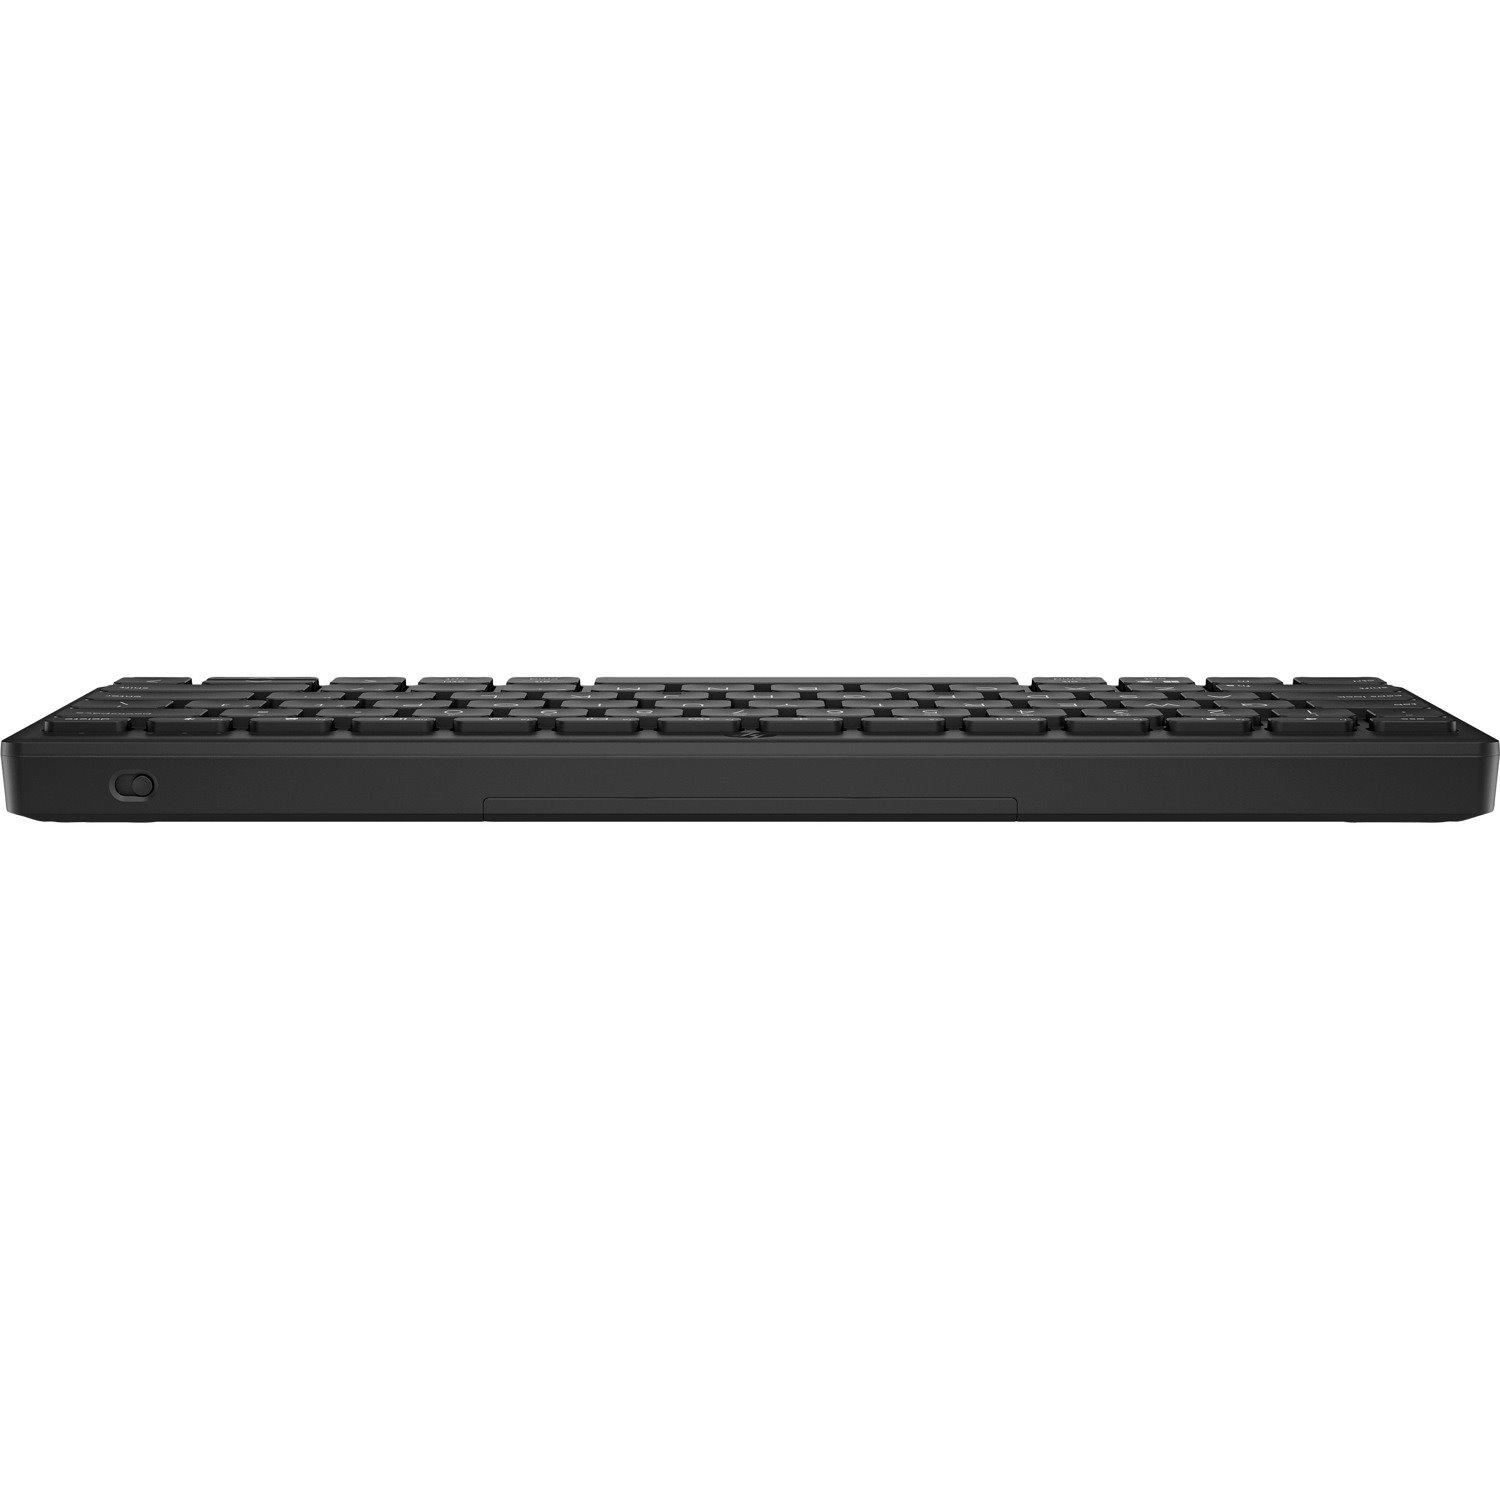 HP Compact 355 Rugged Keyboard - Wireless Connectivity - Black